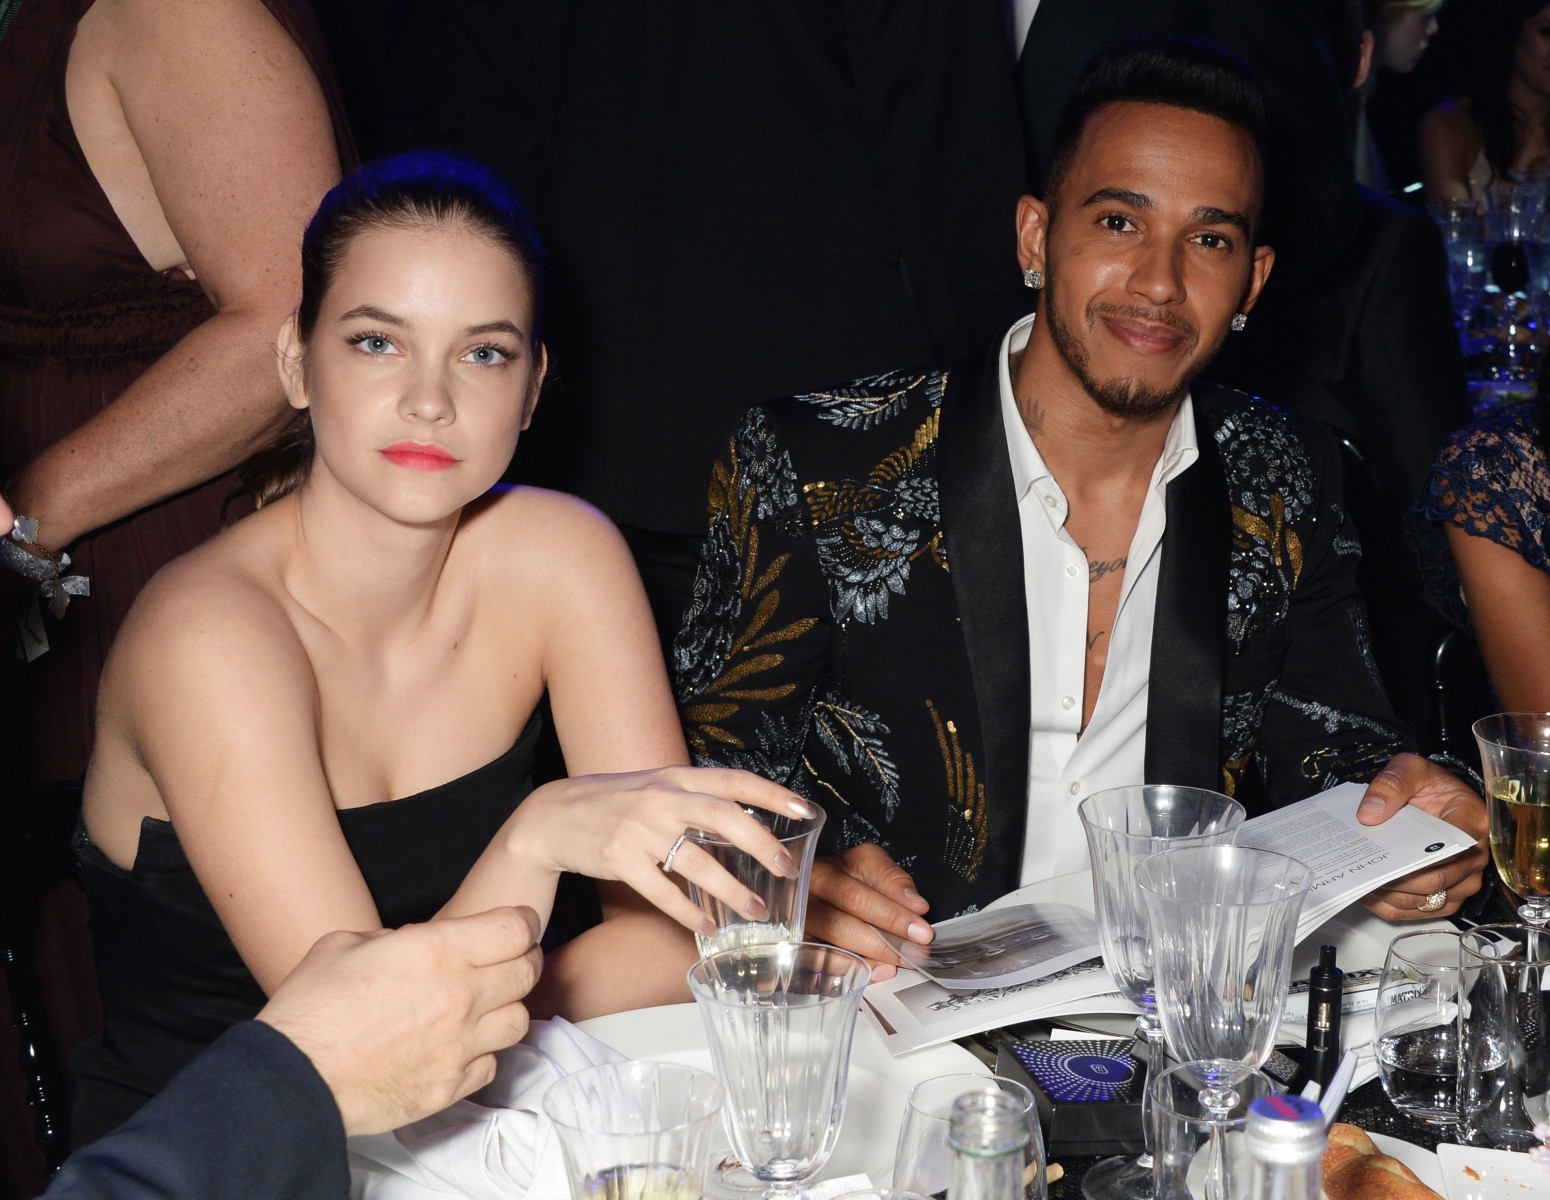 Palvin and Hamilton were seen looking cosy at various events